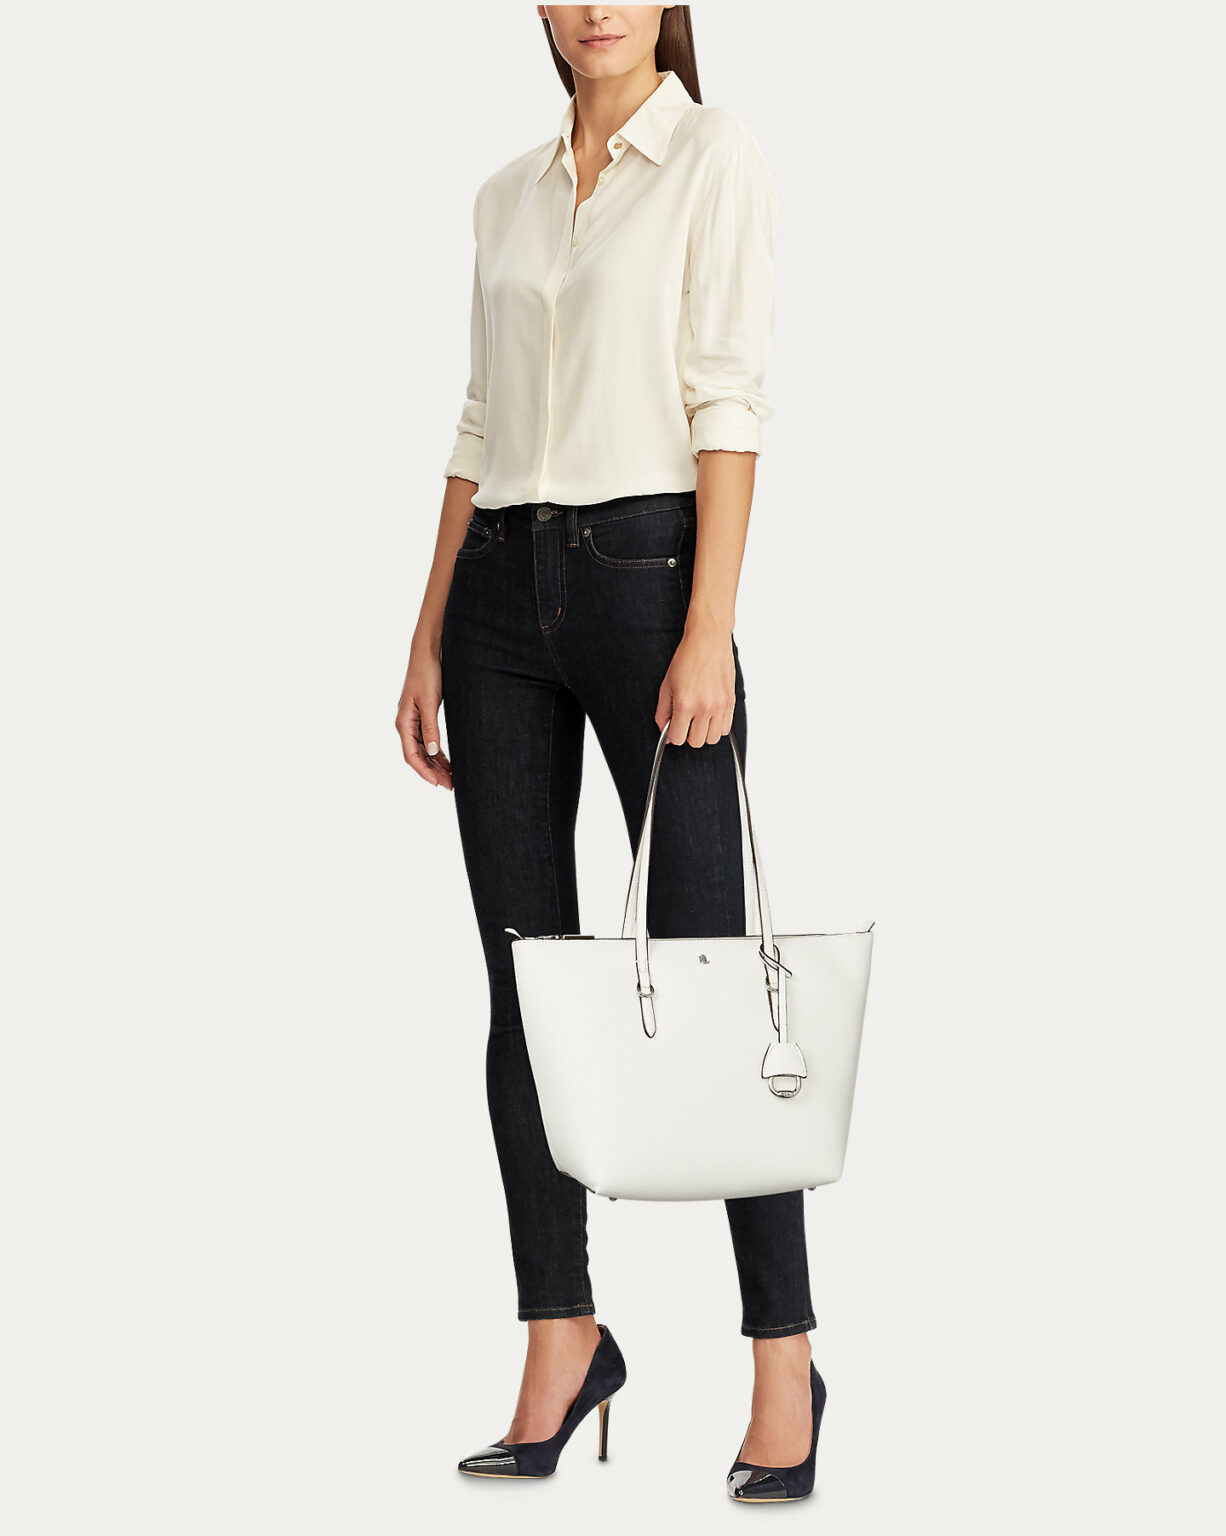 Ralph Lauren Sale Women's Bag and Shoes - 8 best buys up to 50% off ...